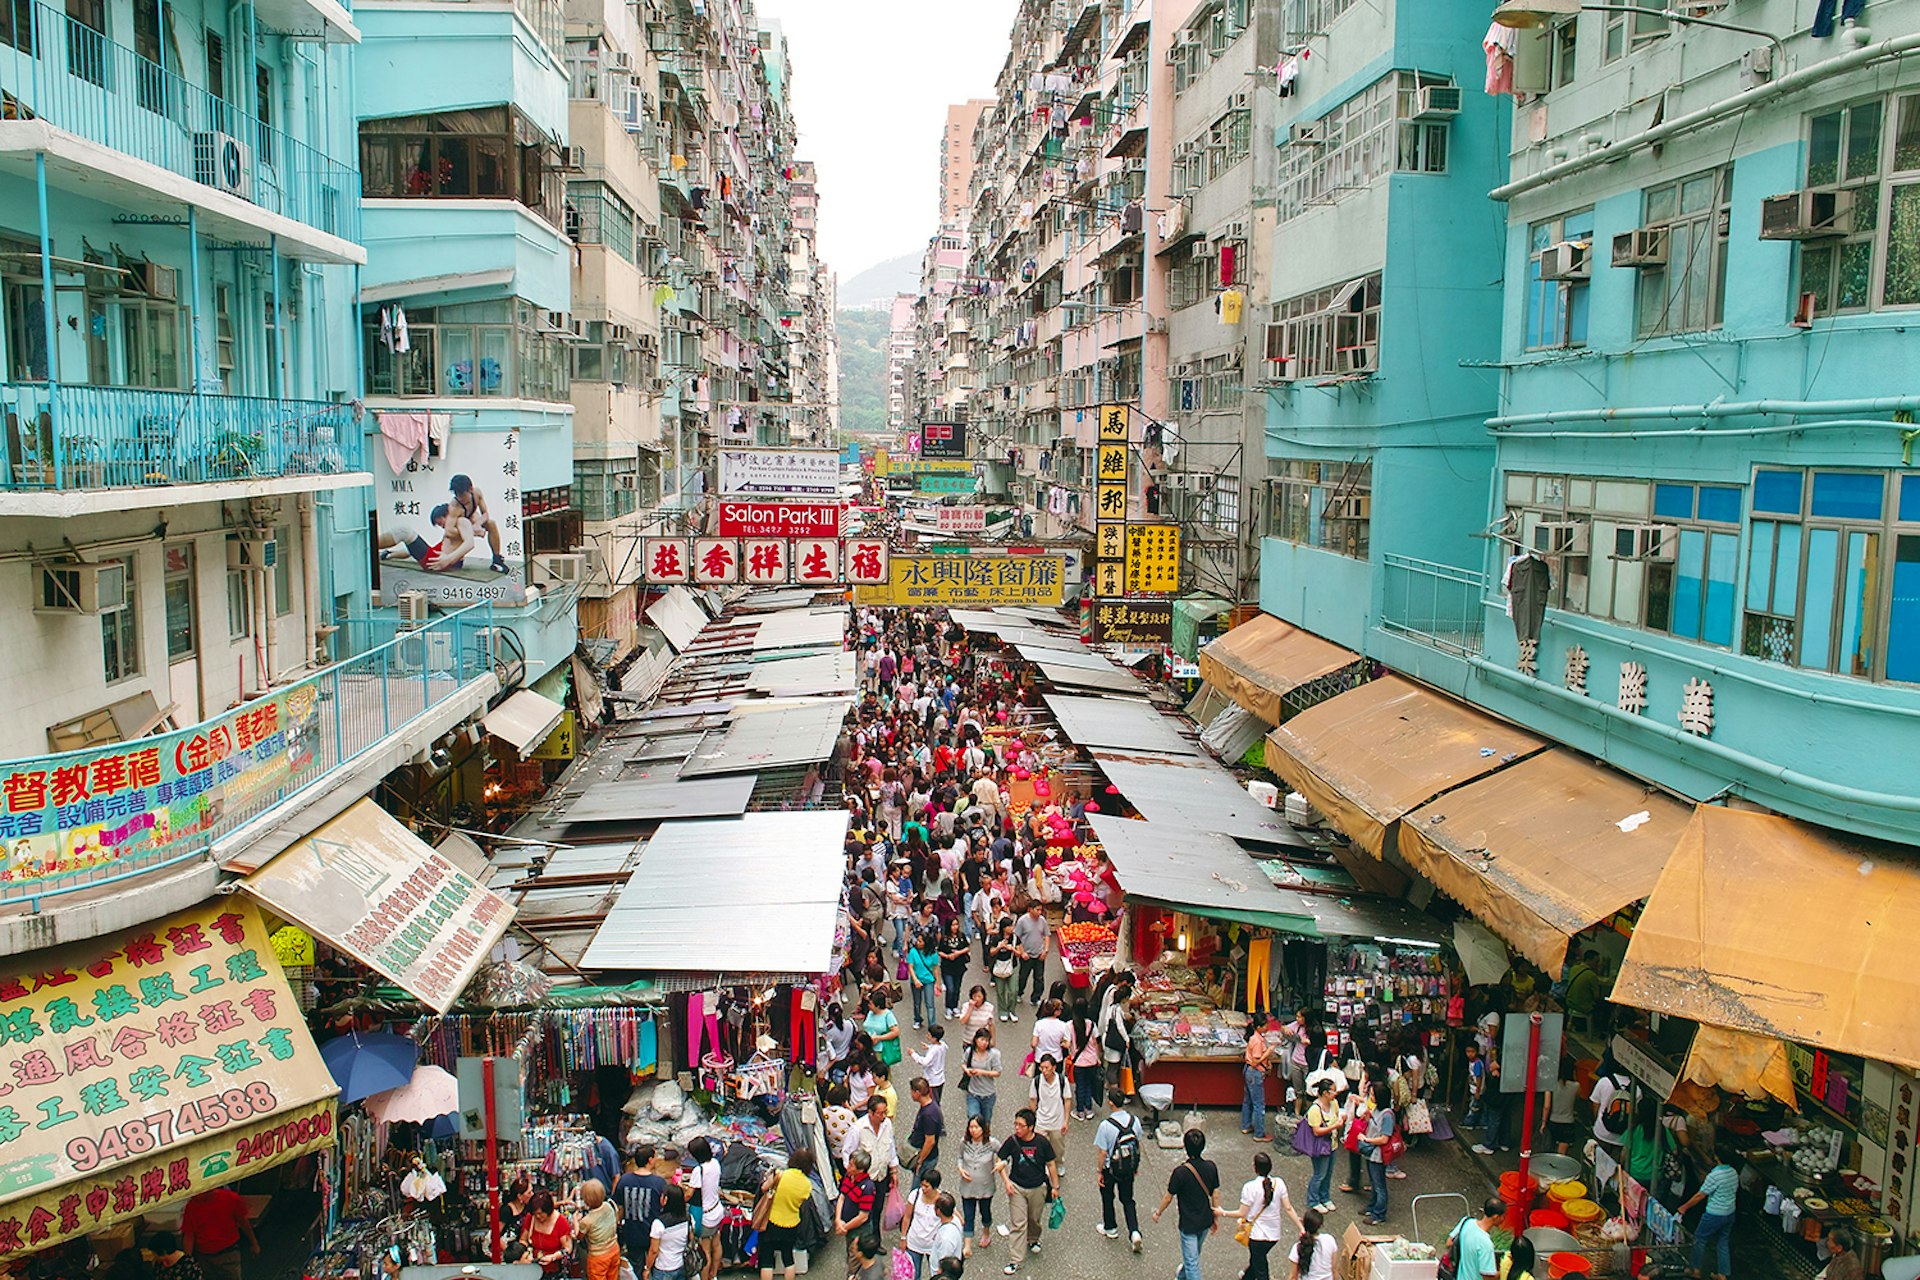 Kowloon's Mong Kok exists in a state of permanent renewal. Image by Joseph Cheng Wai Hok / Moment / Getty Images